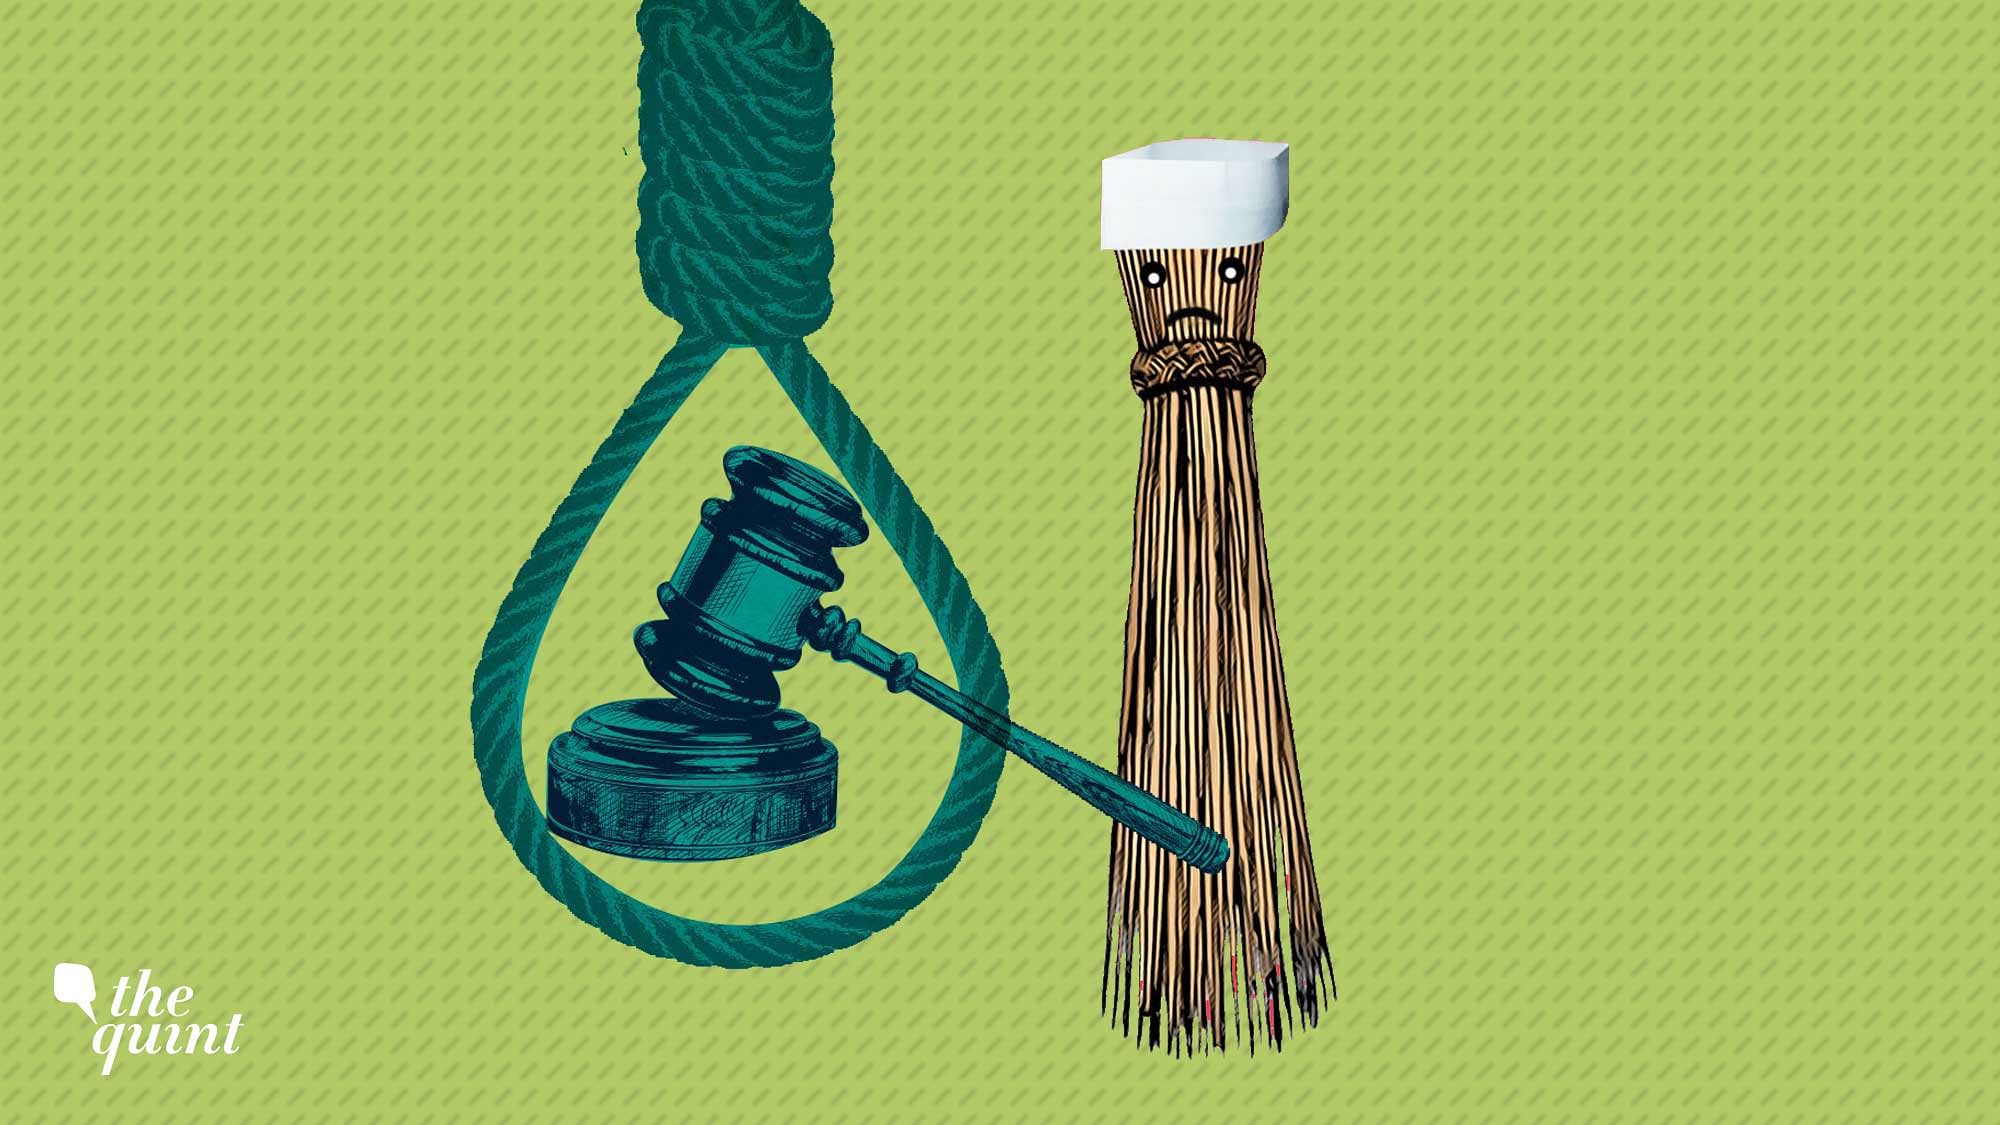 Image of AAP party symbol and noose used for representational purposes.